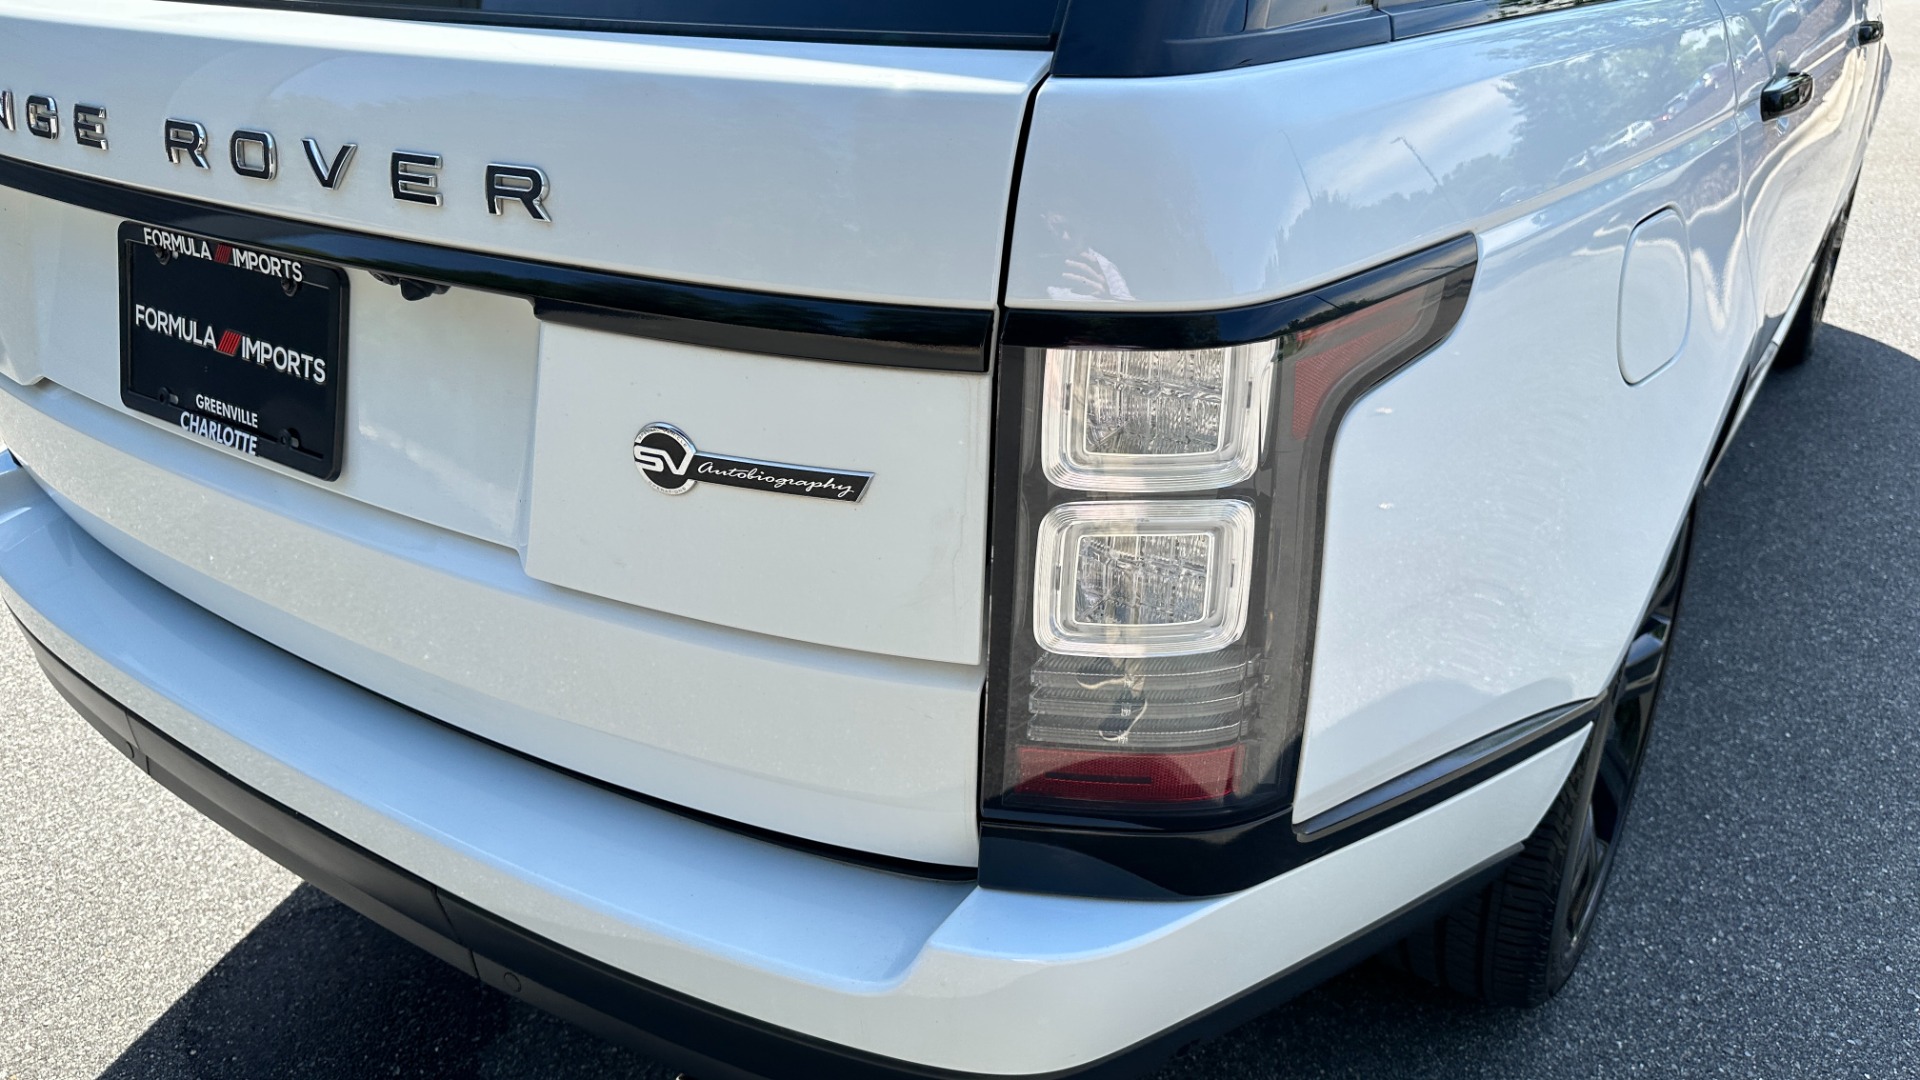 Used 2017 Land Rover Range Rover SV AUTOBIOGRAPHY / LOADED / REAR MASSAGE / EXECUTIVE SEATING / LWB for sale $75,900 at Formula Imports in Charlotte NC 28227 52